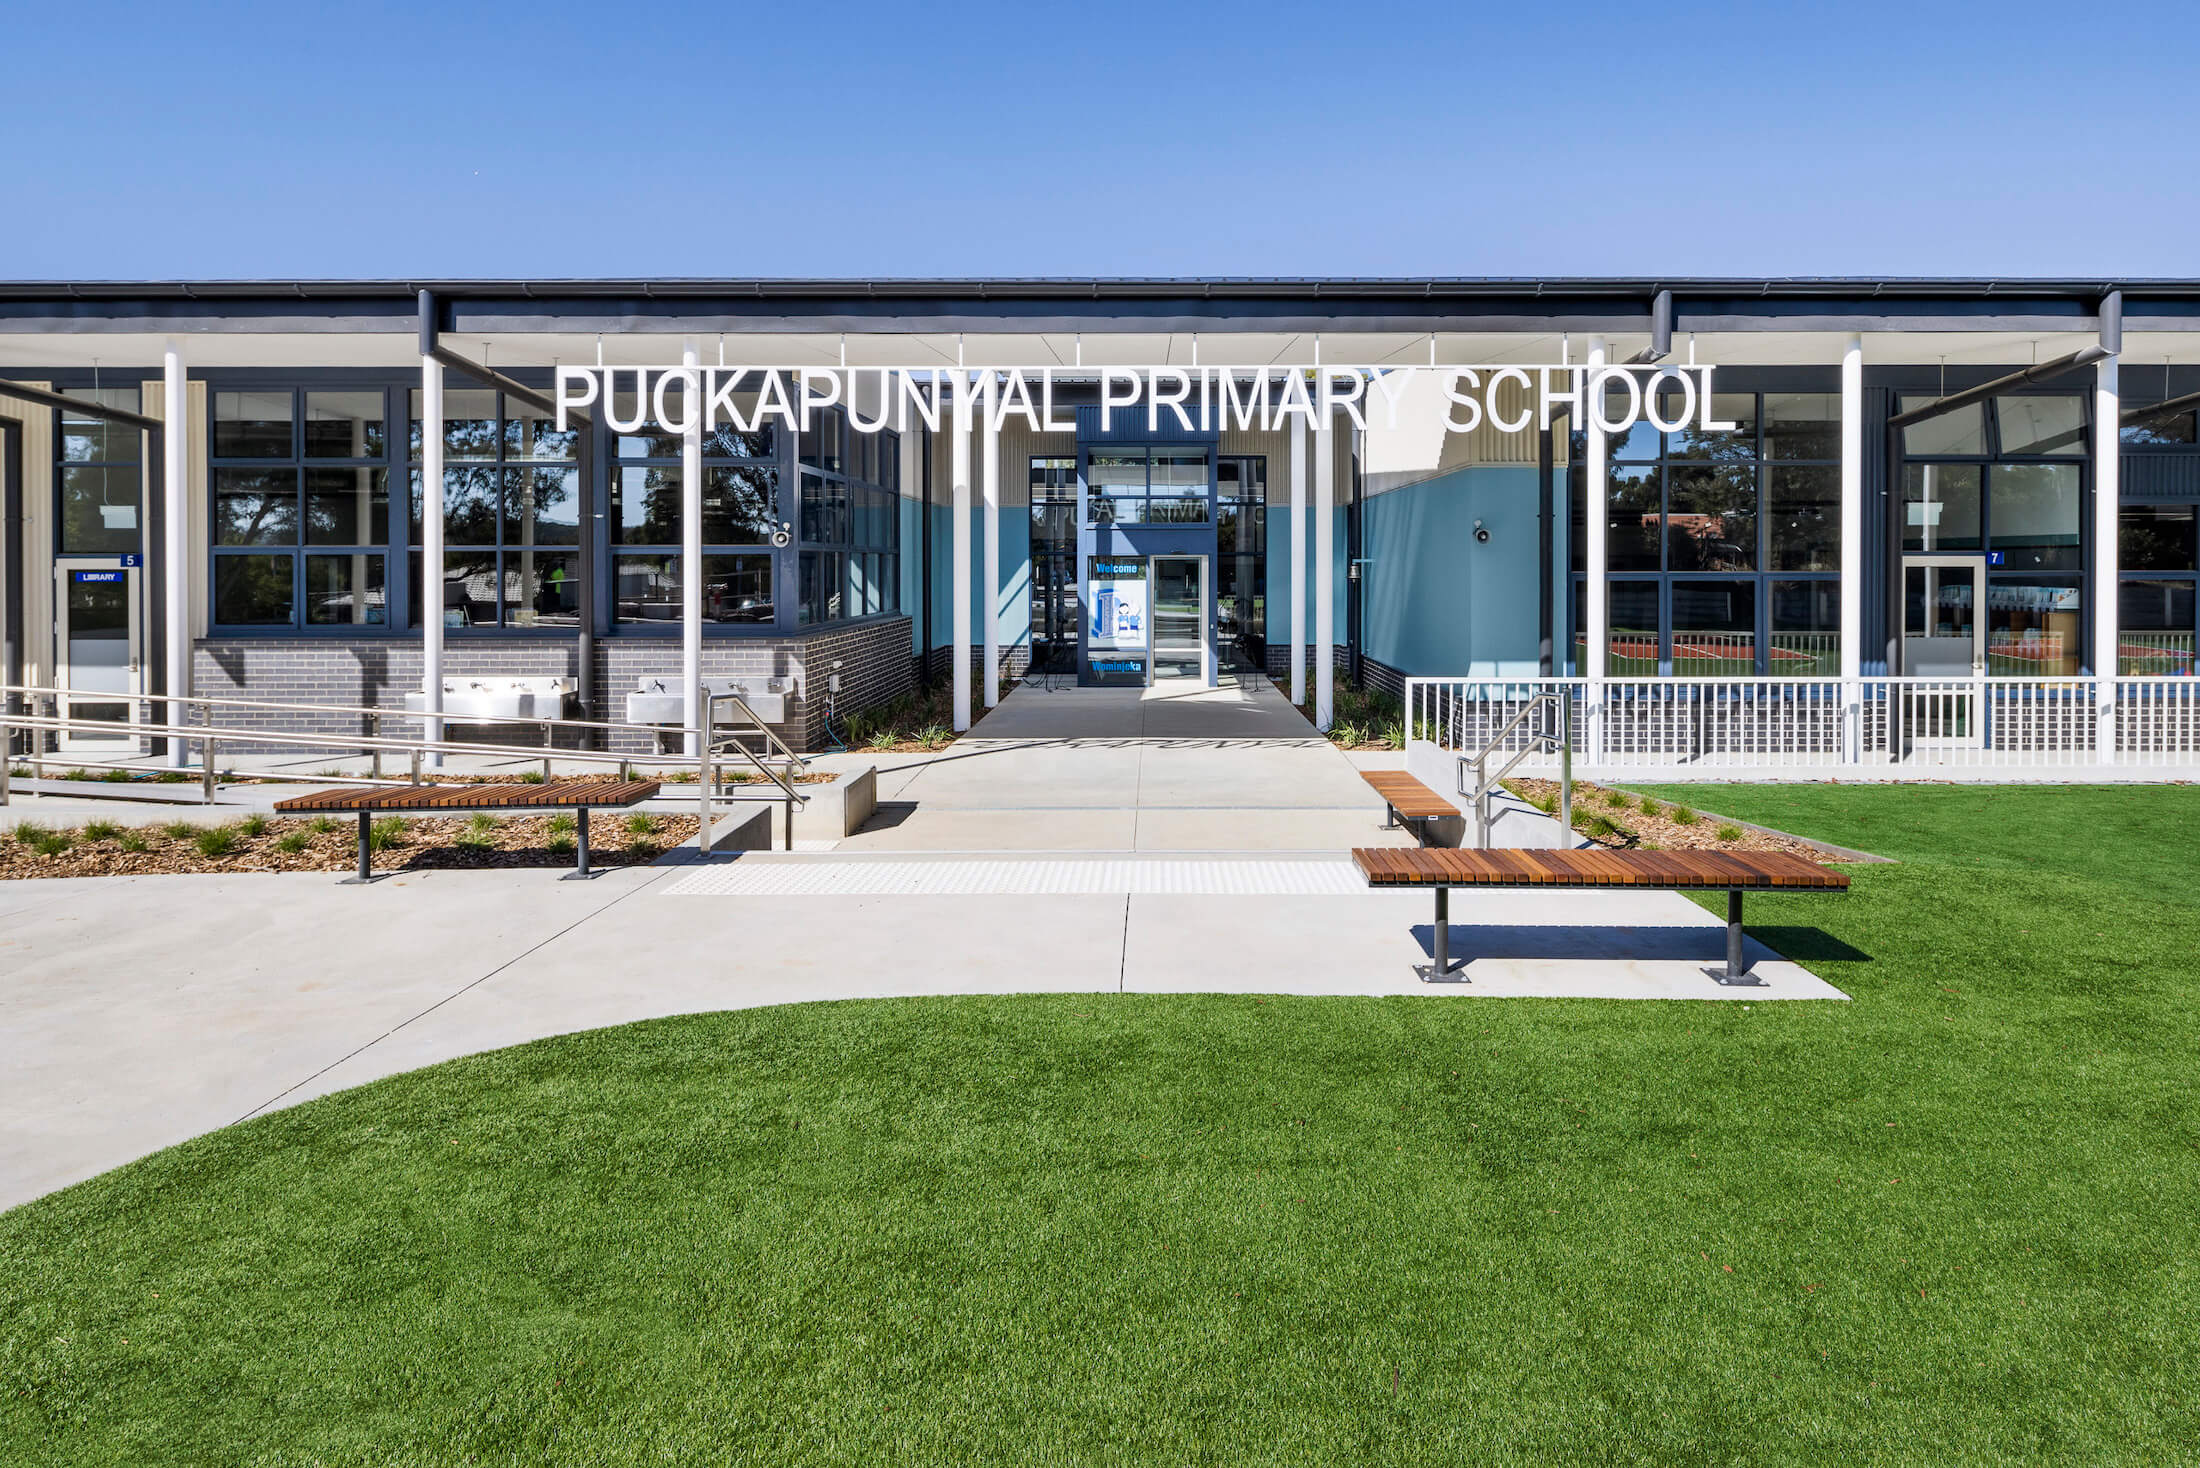 Forecourt to Puckapunyal Primary School with turf, paving and seating, white letter signage